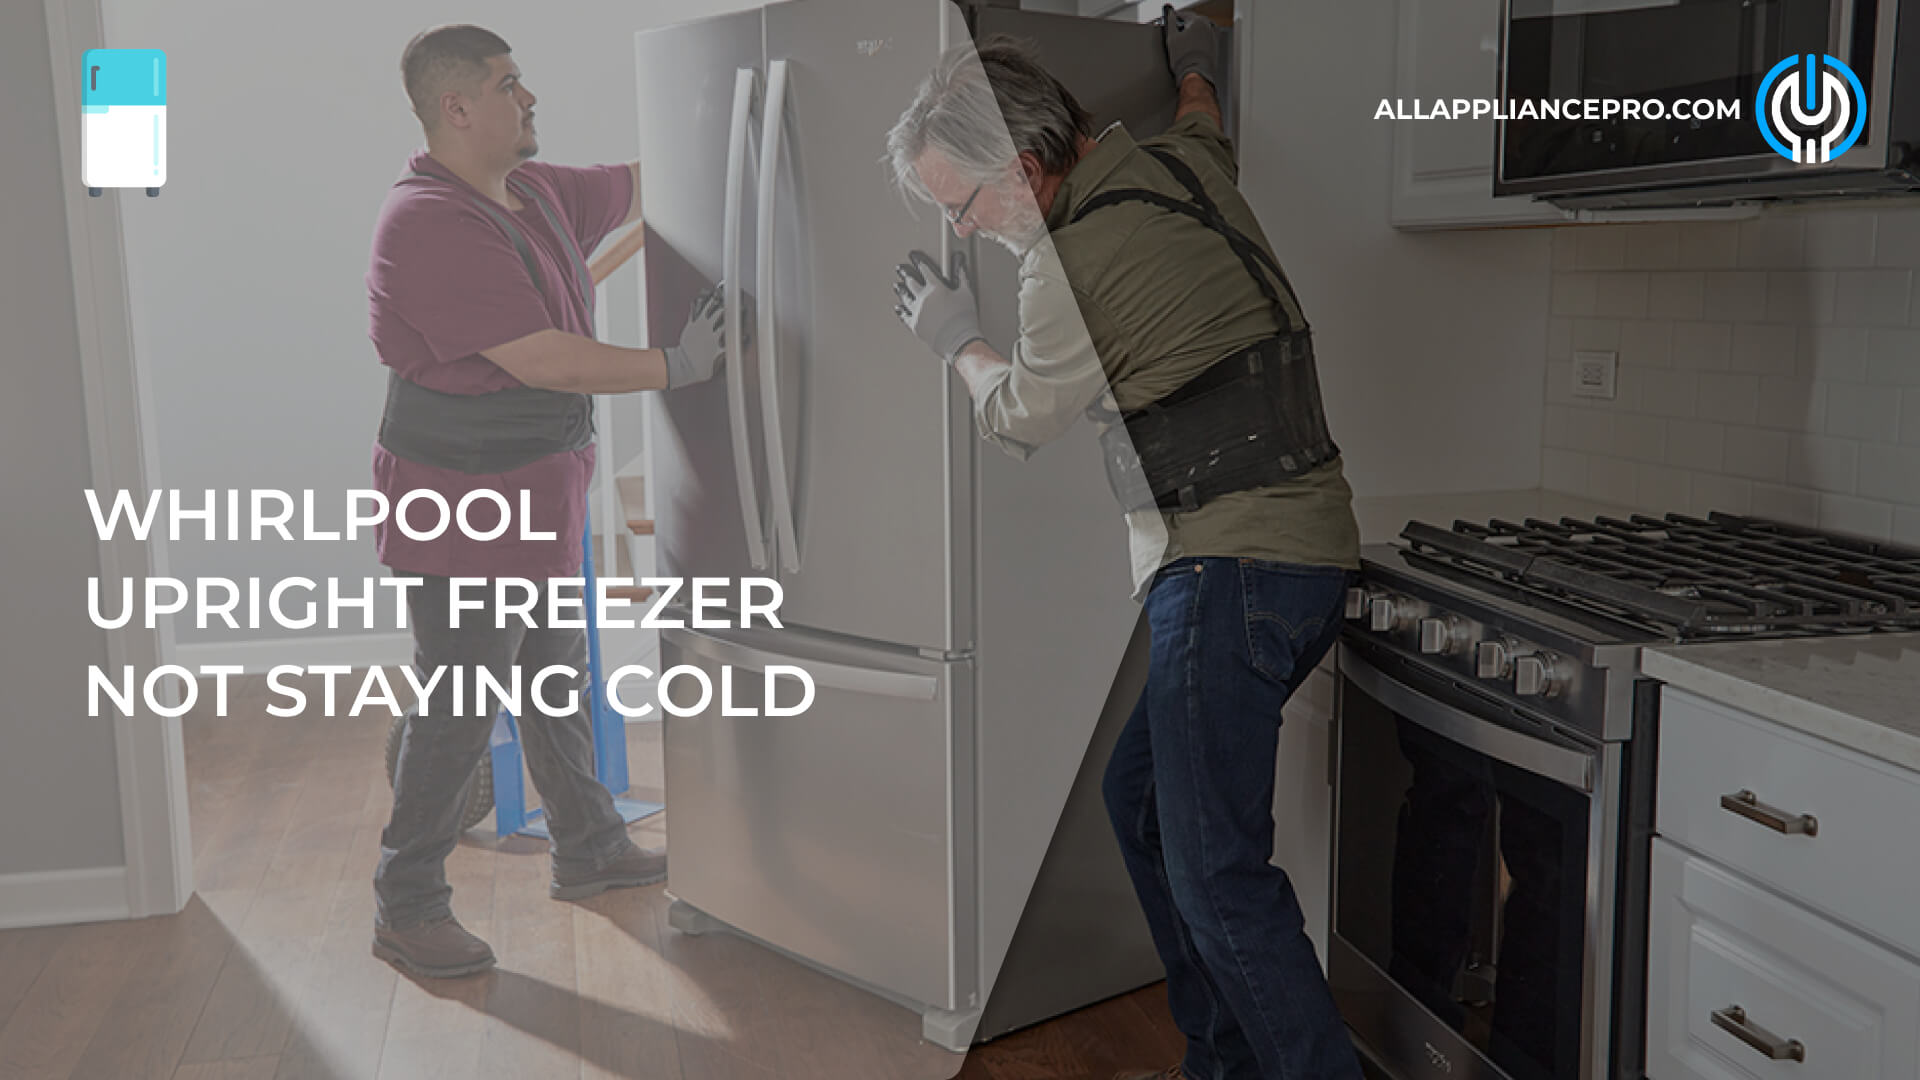 Whirlpool Upright Freezer Not Staying Cold